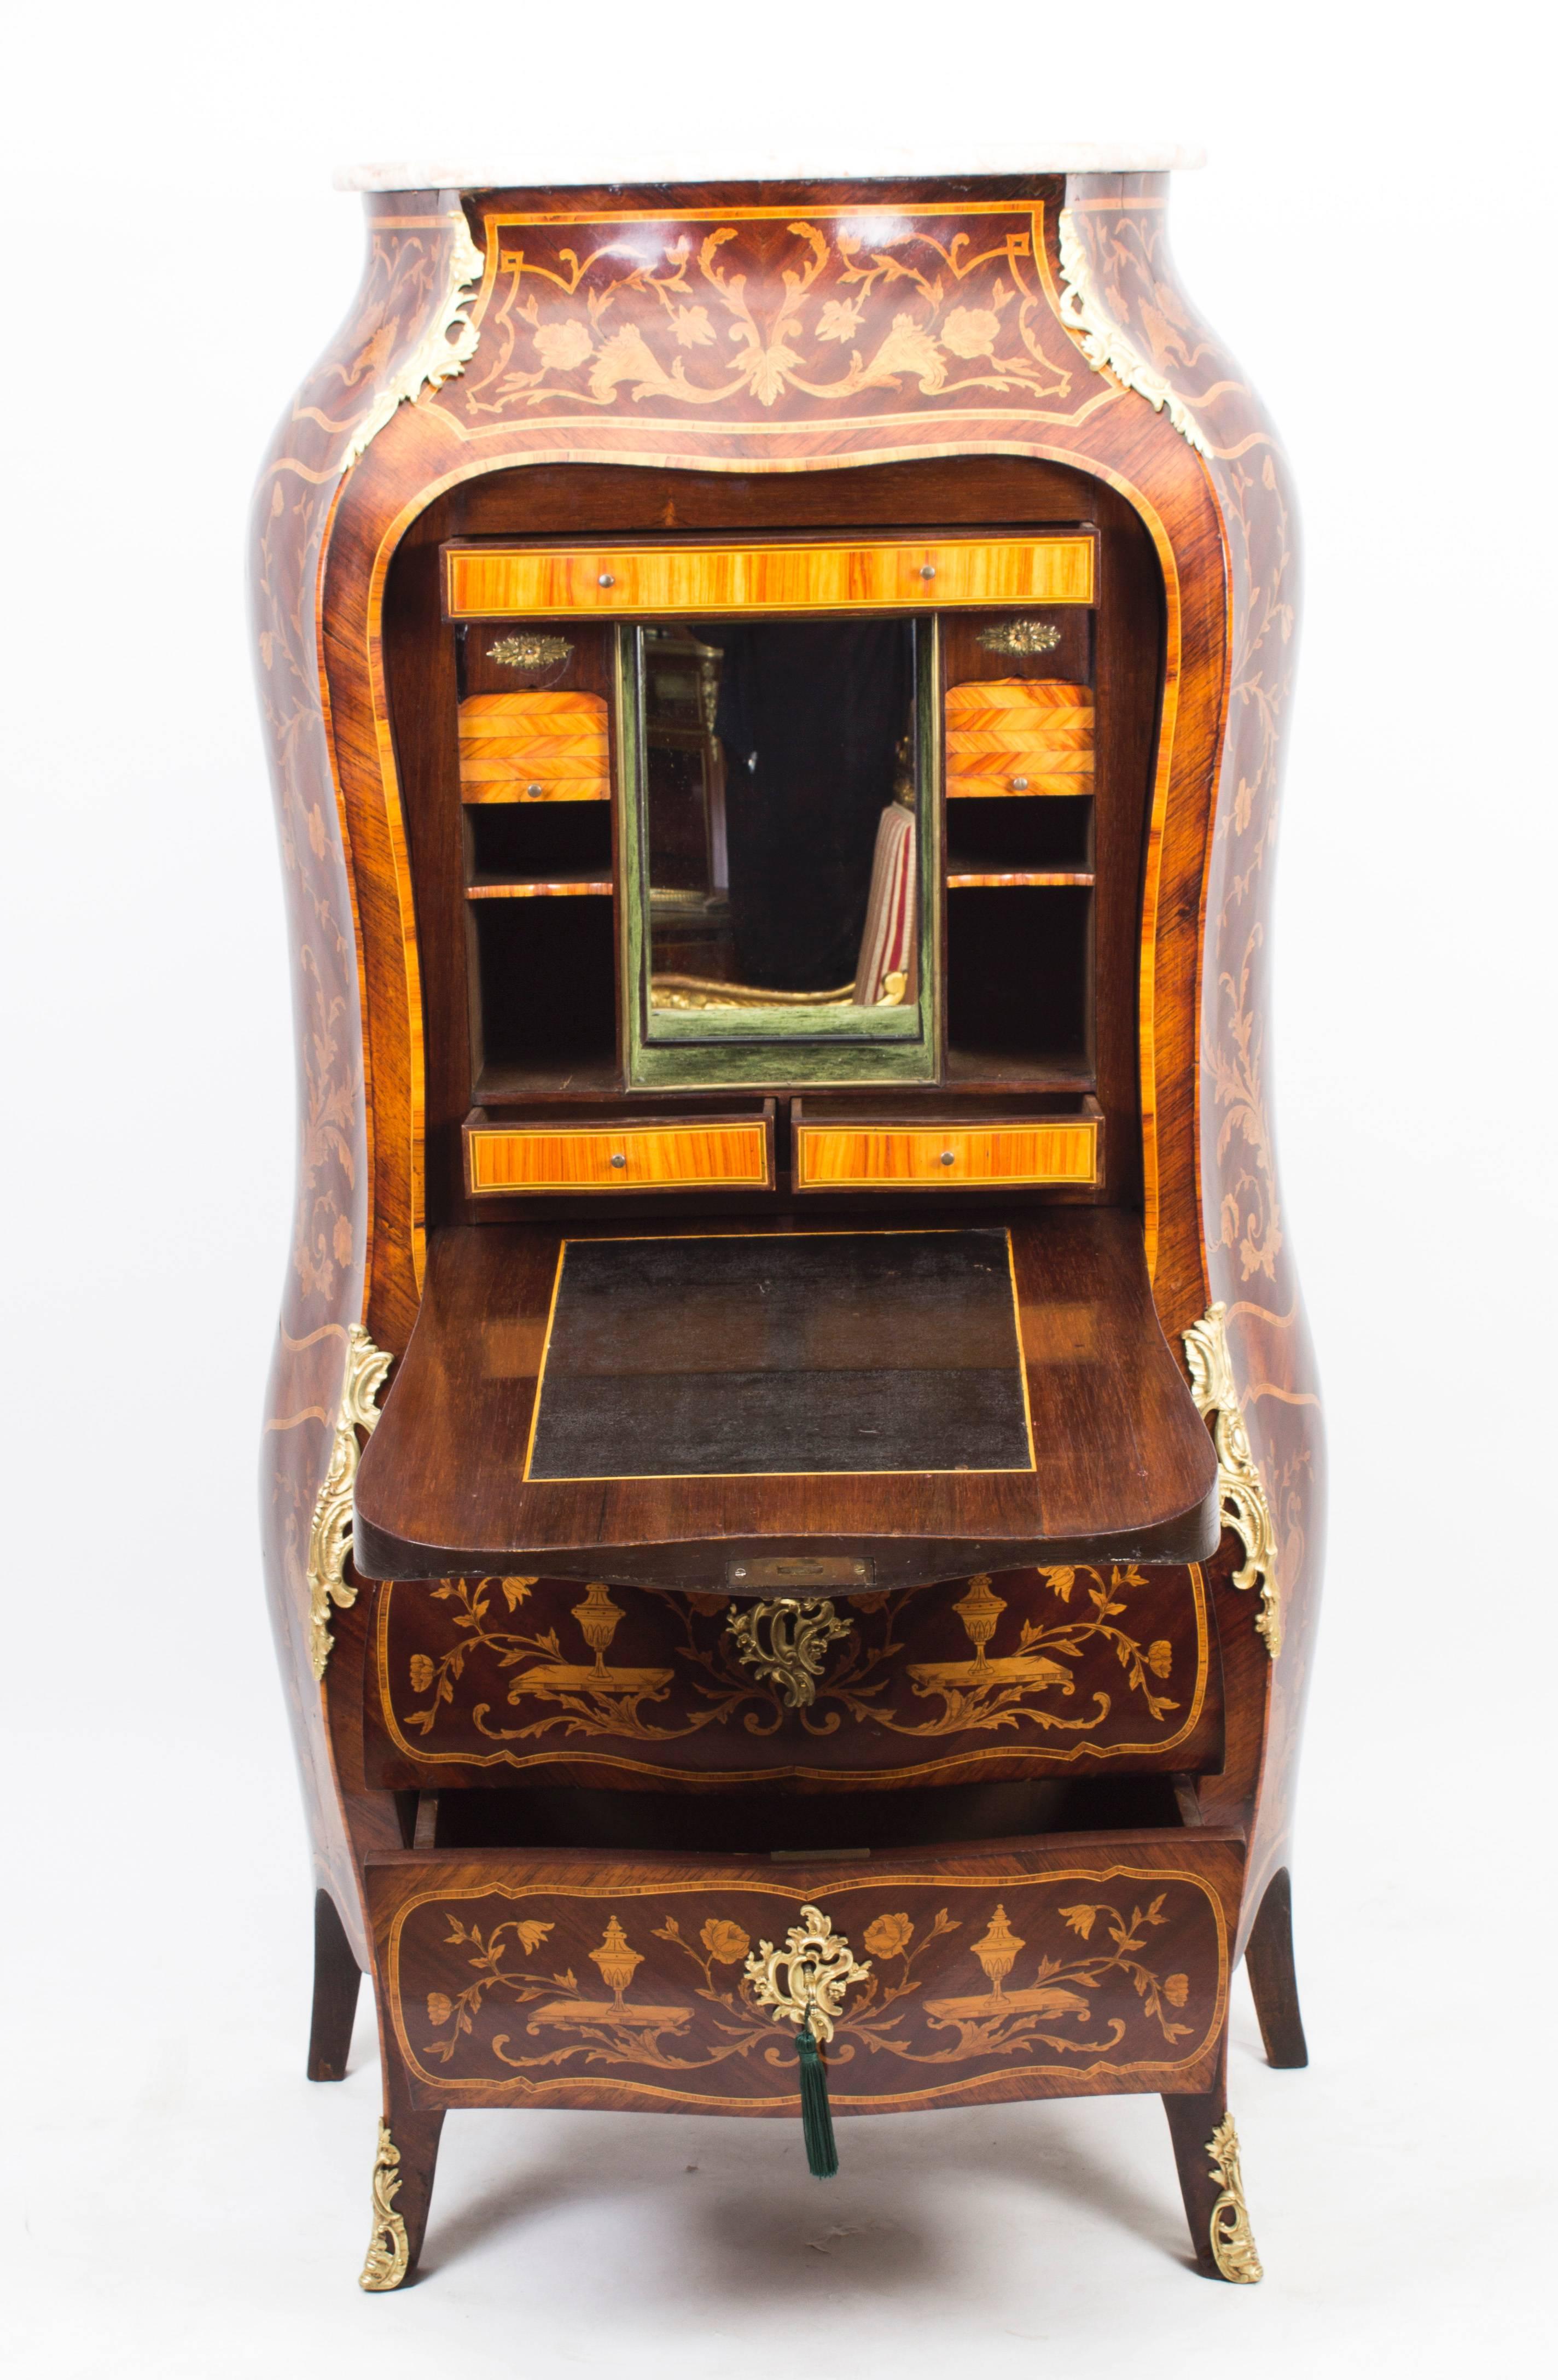 Dating from around 1850, this is a wonderful antique French Rococo Revival Secretaire a Abattant featuring ormolu mounted mahogany, gonzalo alves and marquetry.

A Secretaire a abattant is a tall French writing-desk, the top part of which resembles